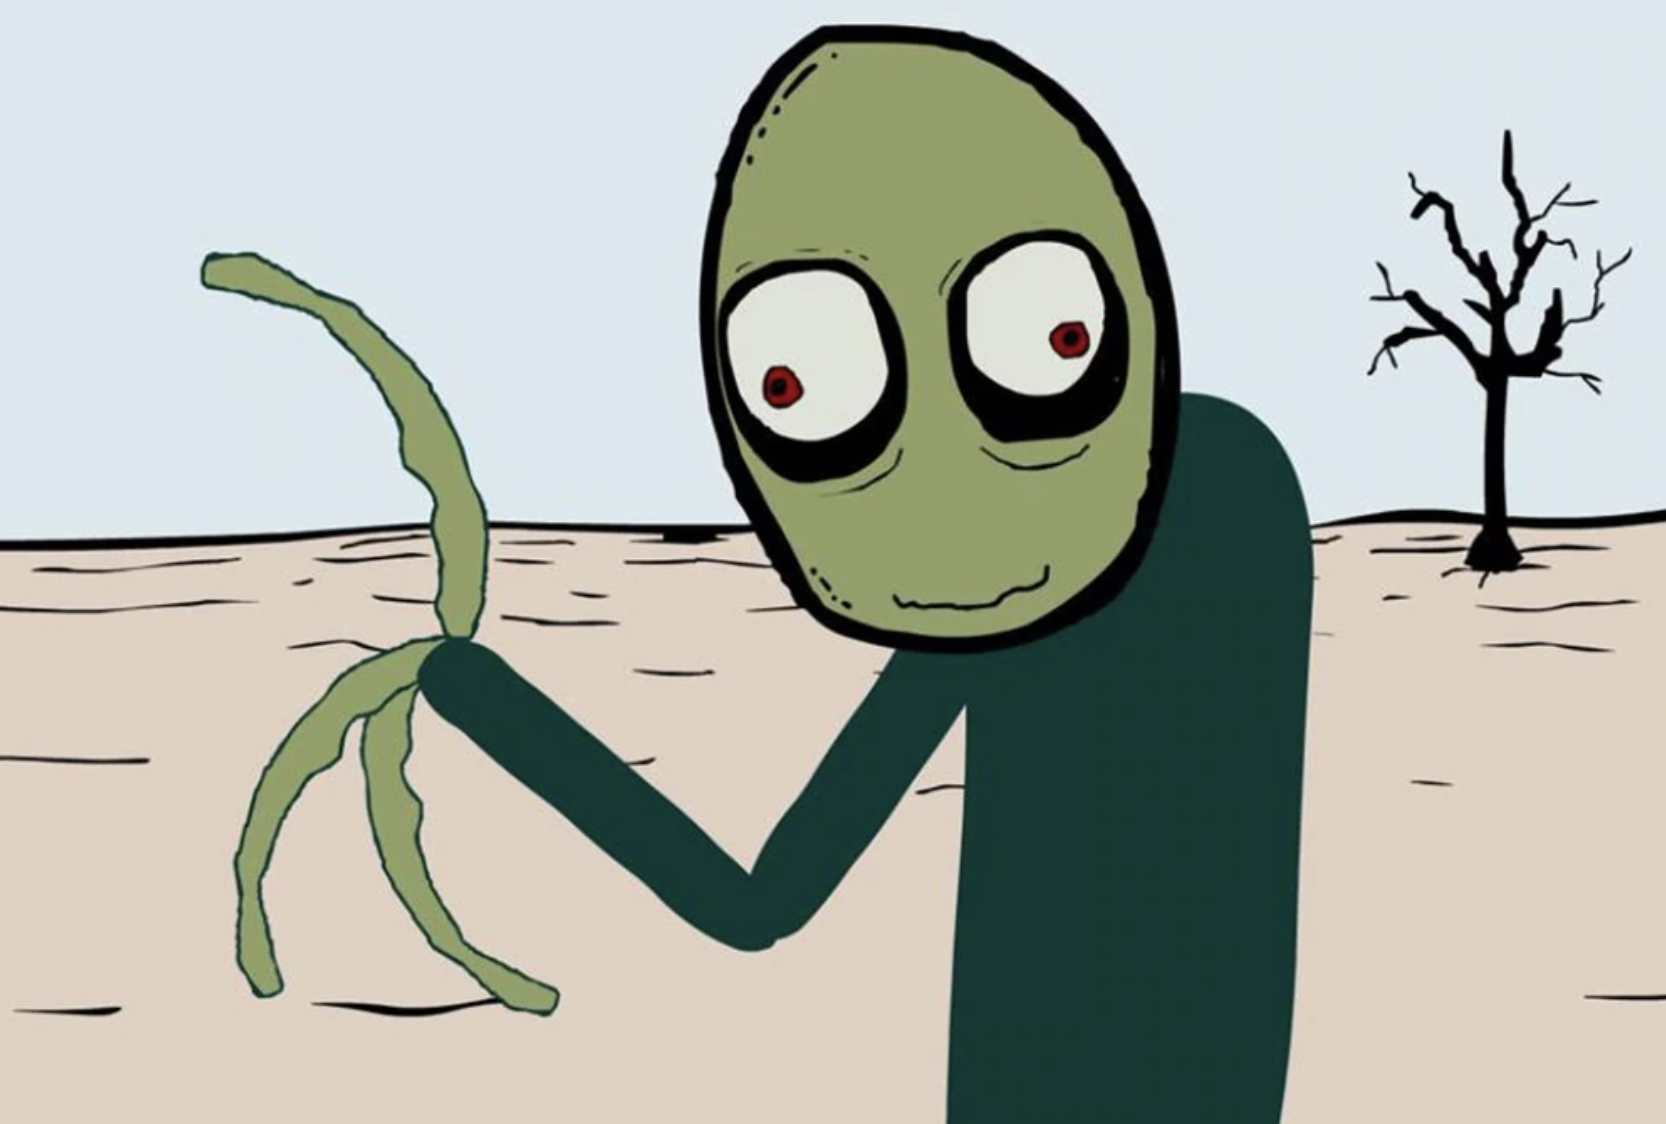 A still from the popular youtube series Salad Fingers showing a green man with austere features, crazy eyes and long fingers standing in front of a desertscape